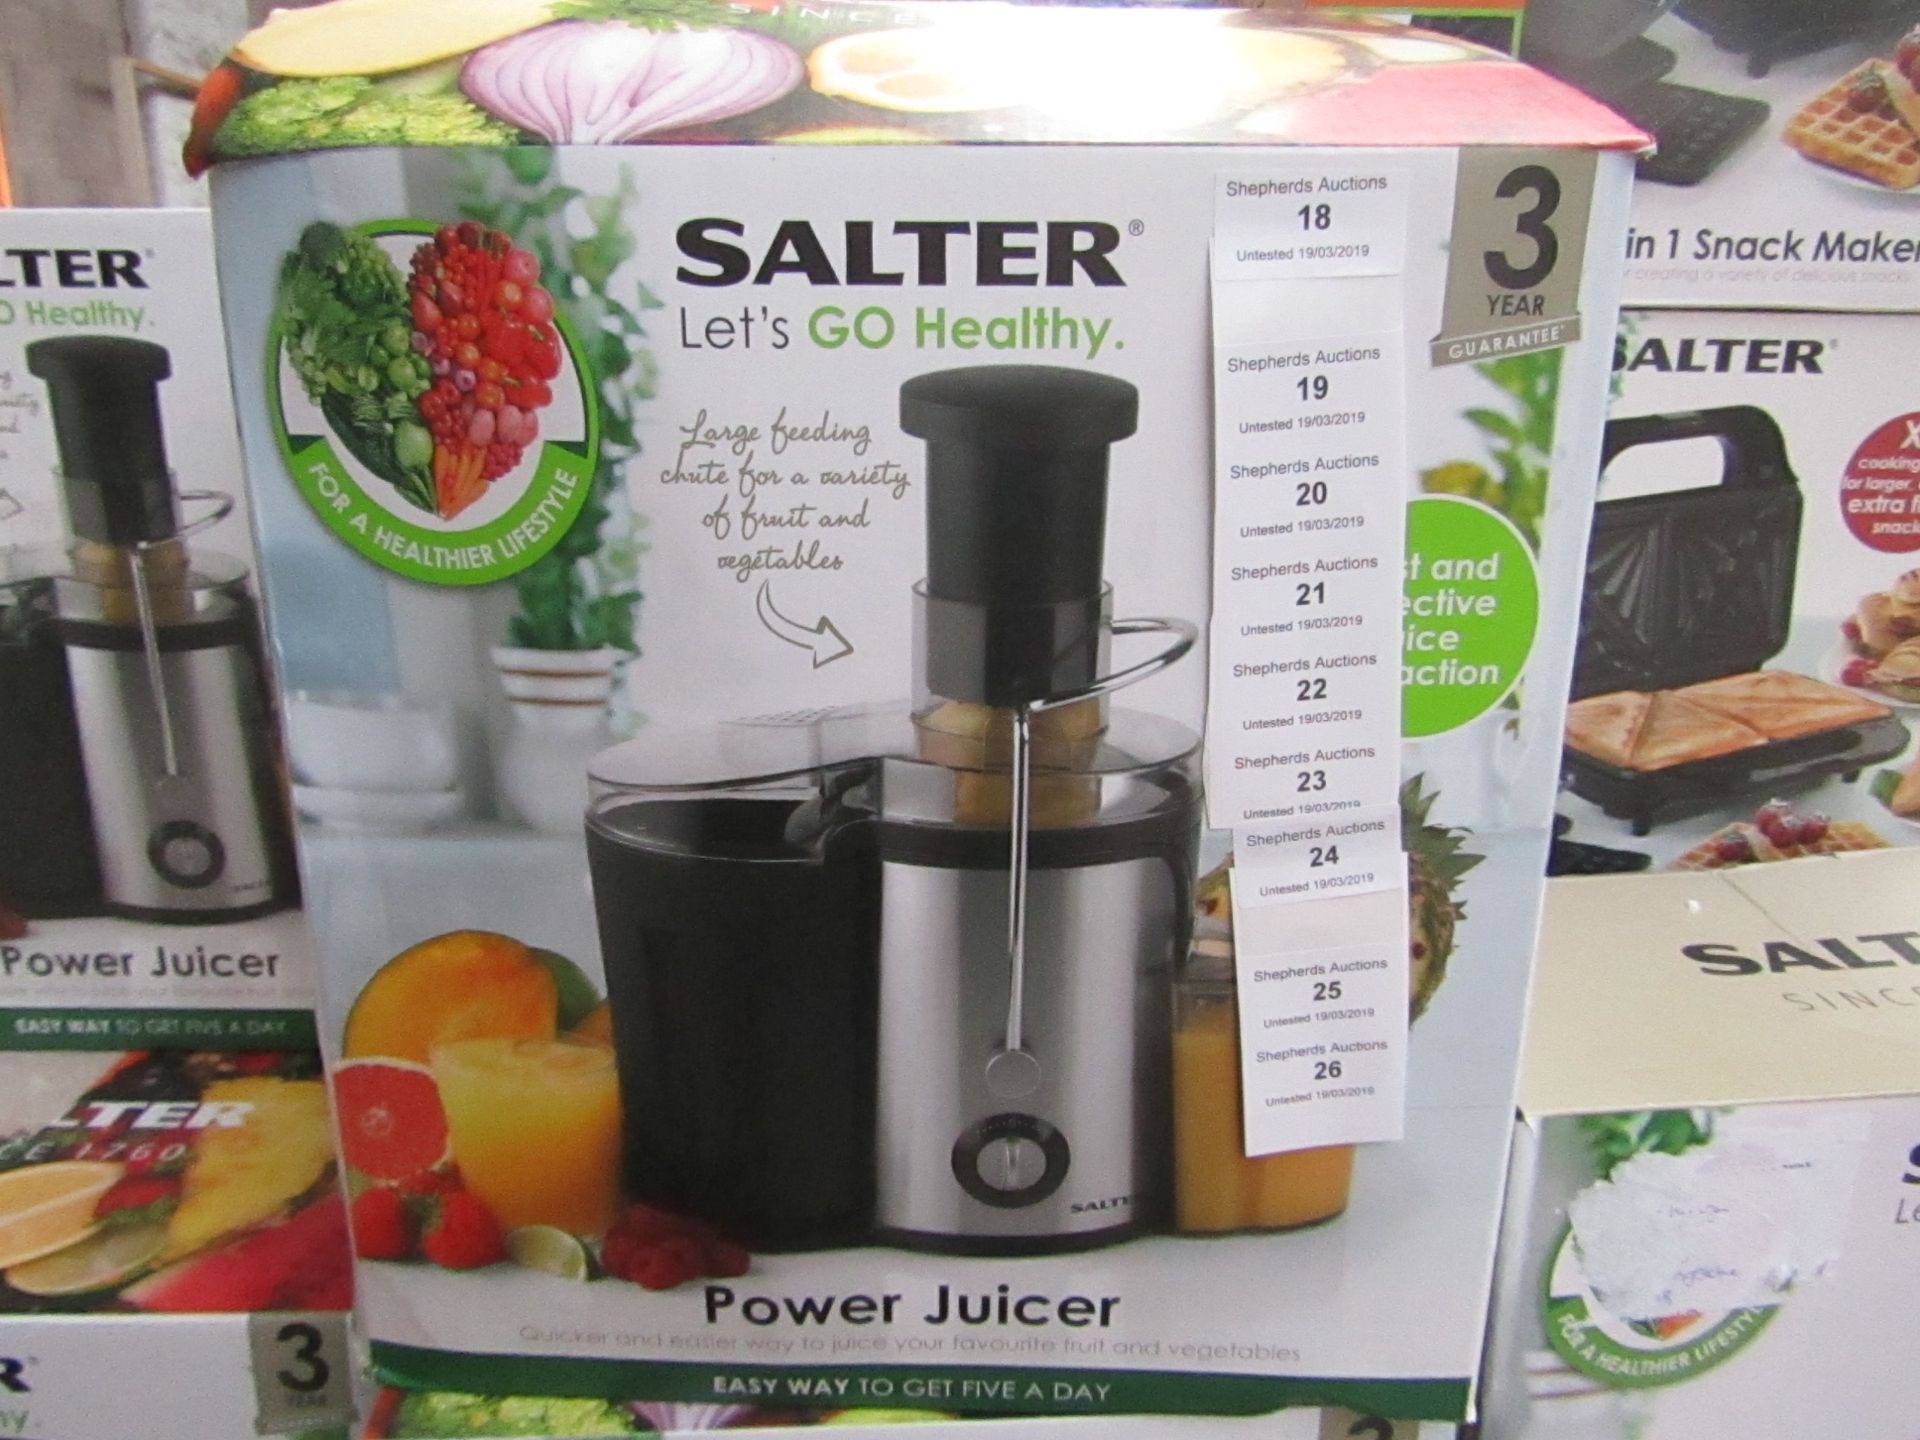 Salter power juicer boxed